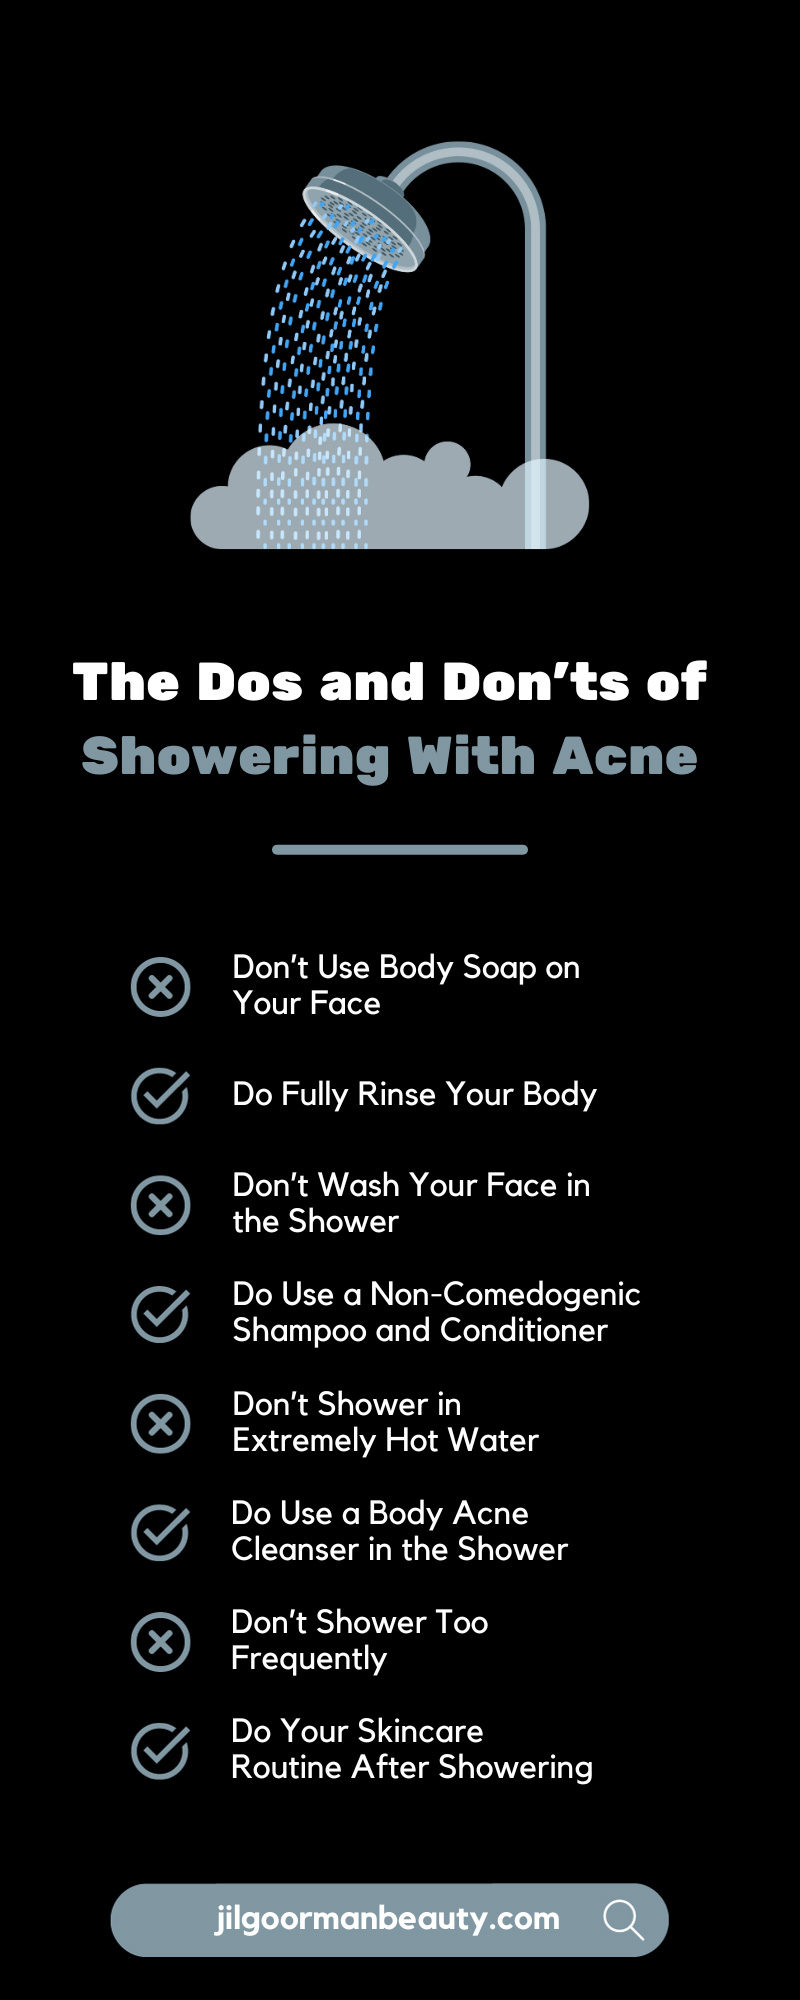 The Dos and Don’ts of Showering With Acne